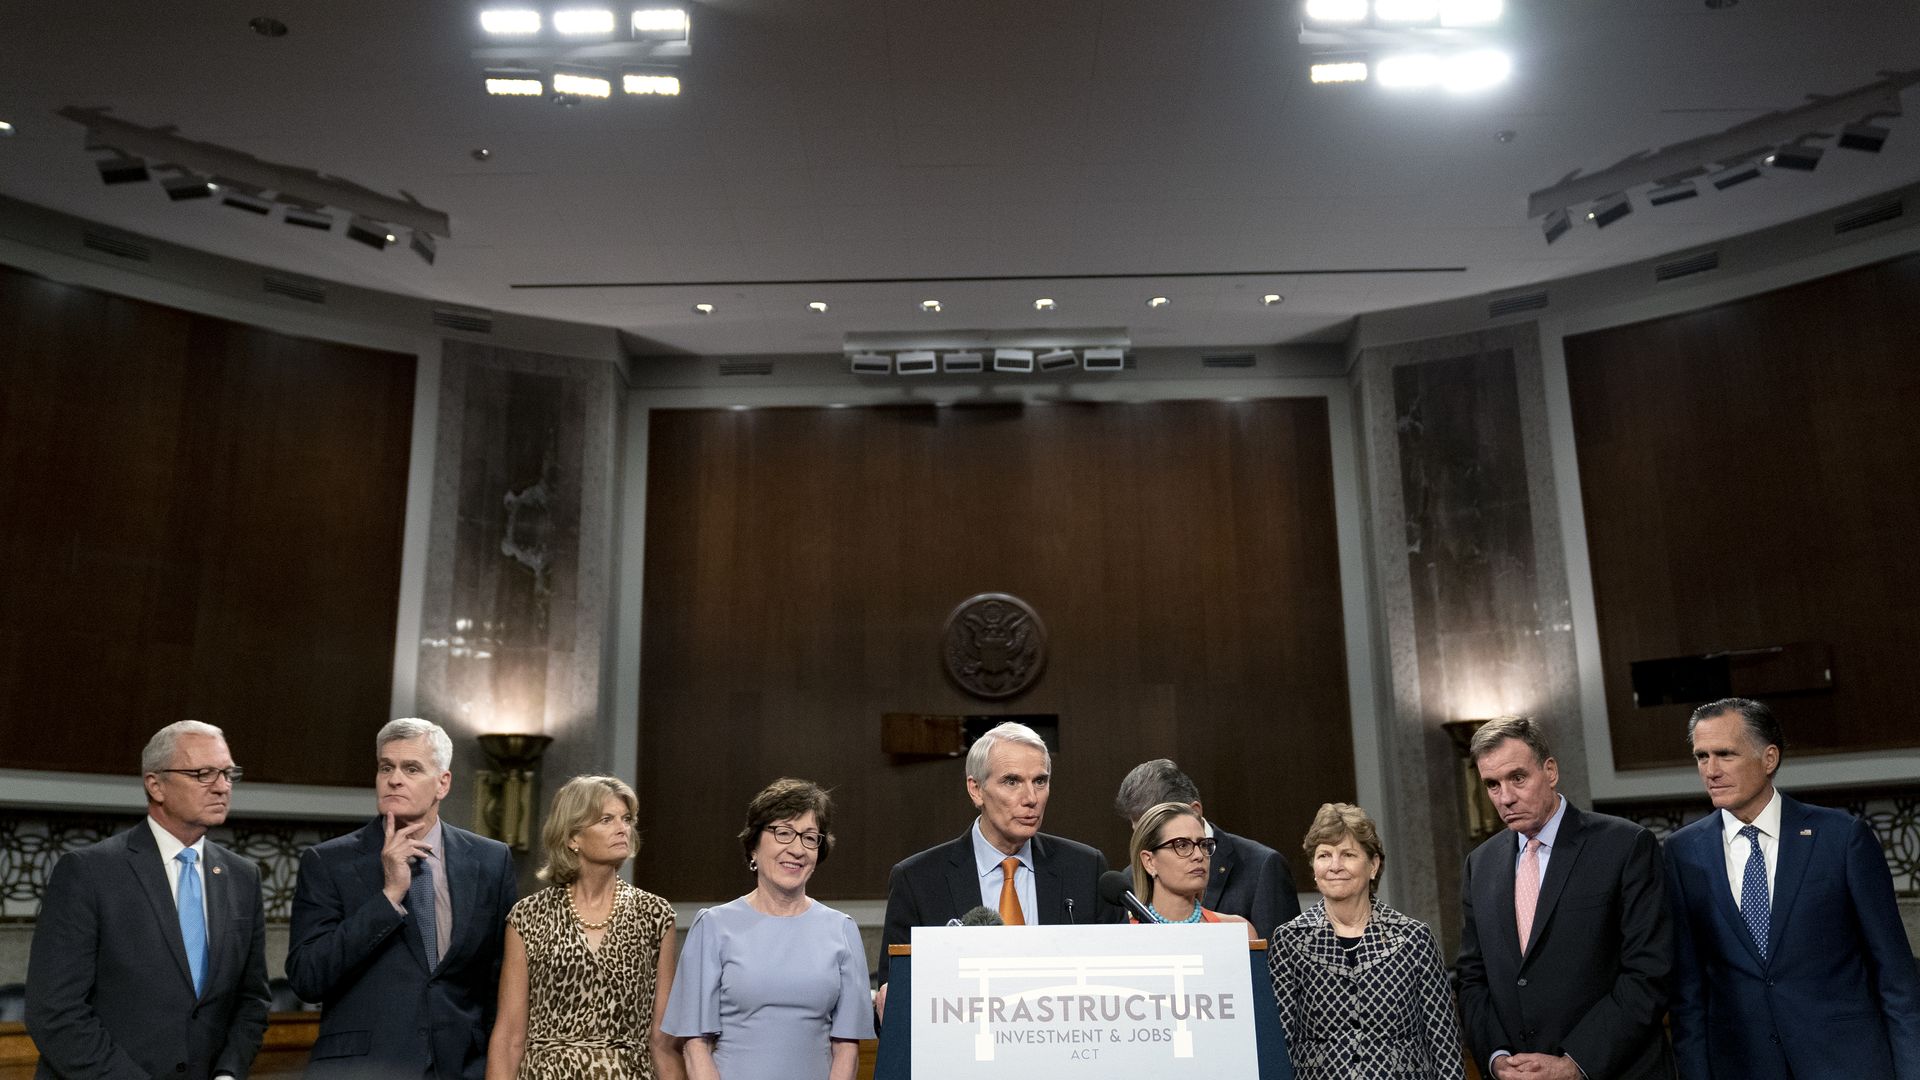 Senator Rob Portman, a Republican from Ohio, center, speaks during a news conference in the Dirksen Senate Office Building in Washington, D.C., U.S., on Wednesday, July 28, 2021.